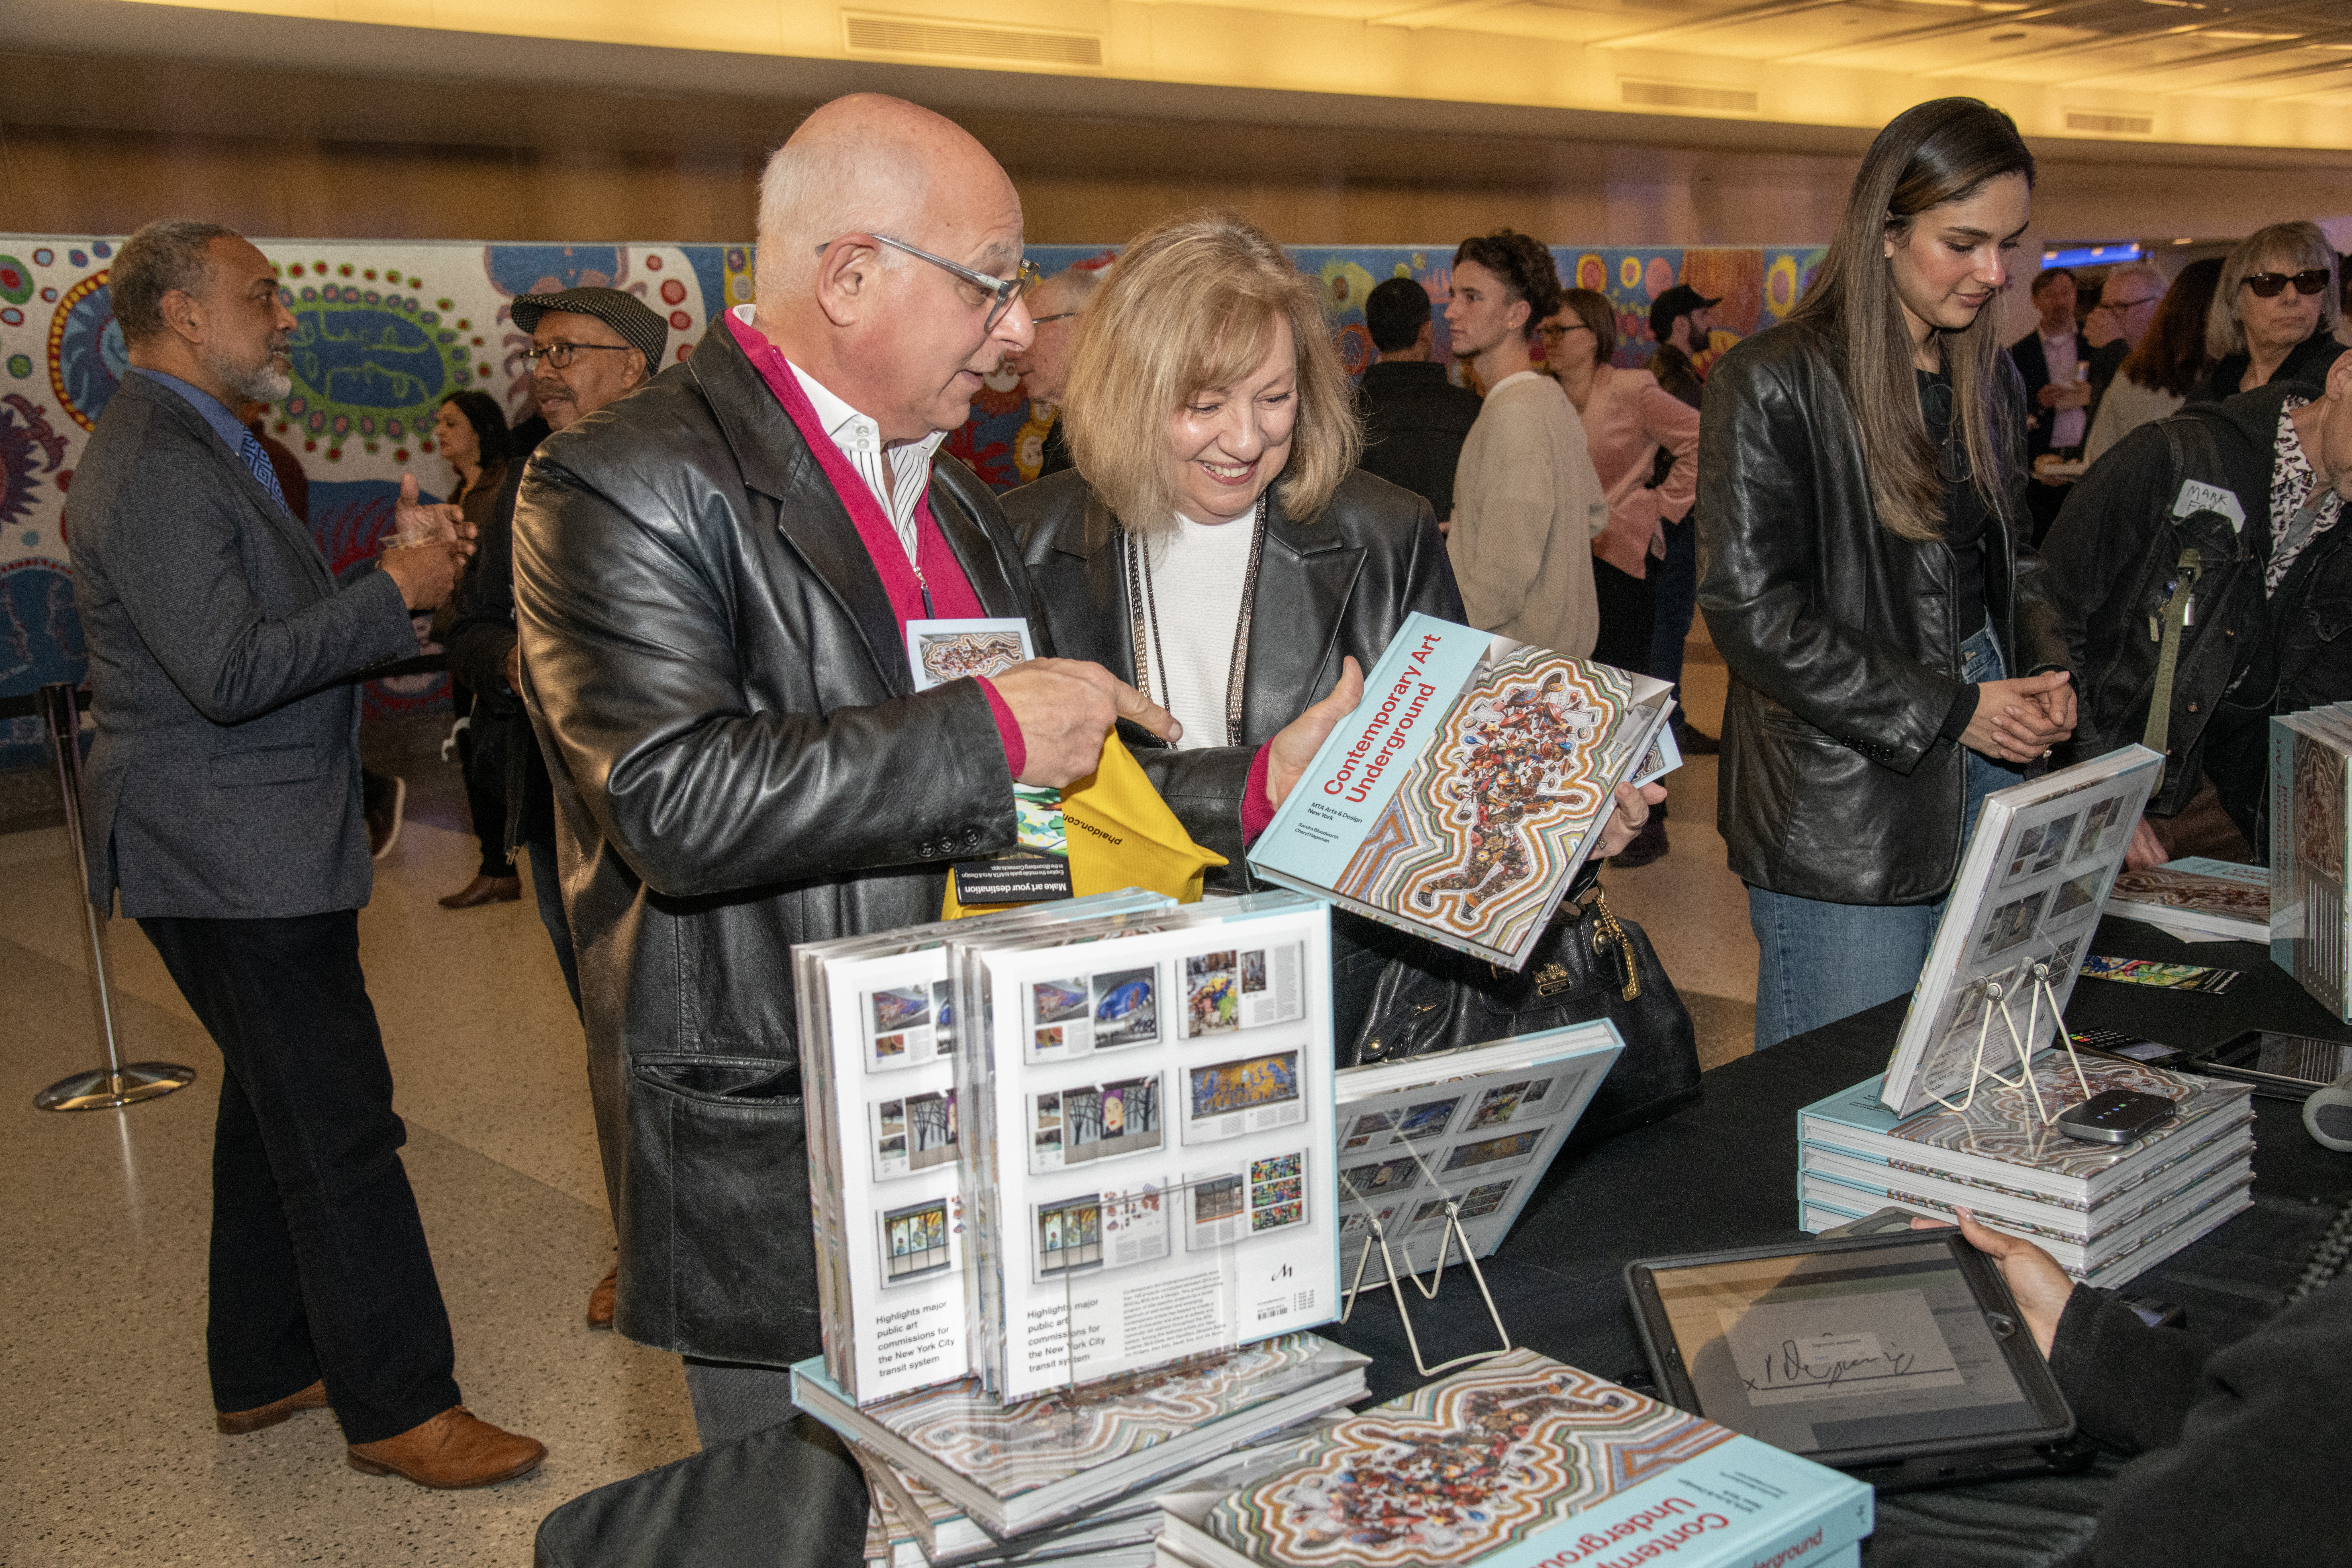 Readers Purchase Arts & Design Book At Grand Central Madison